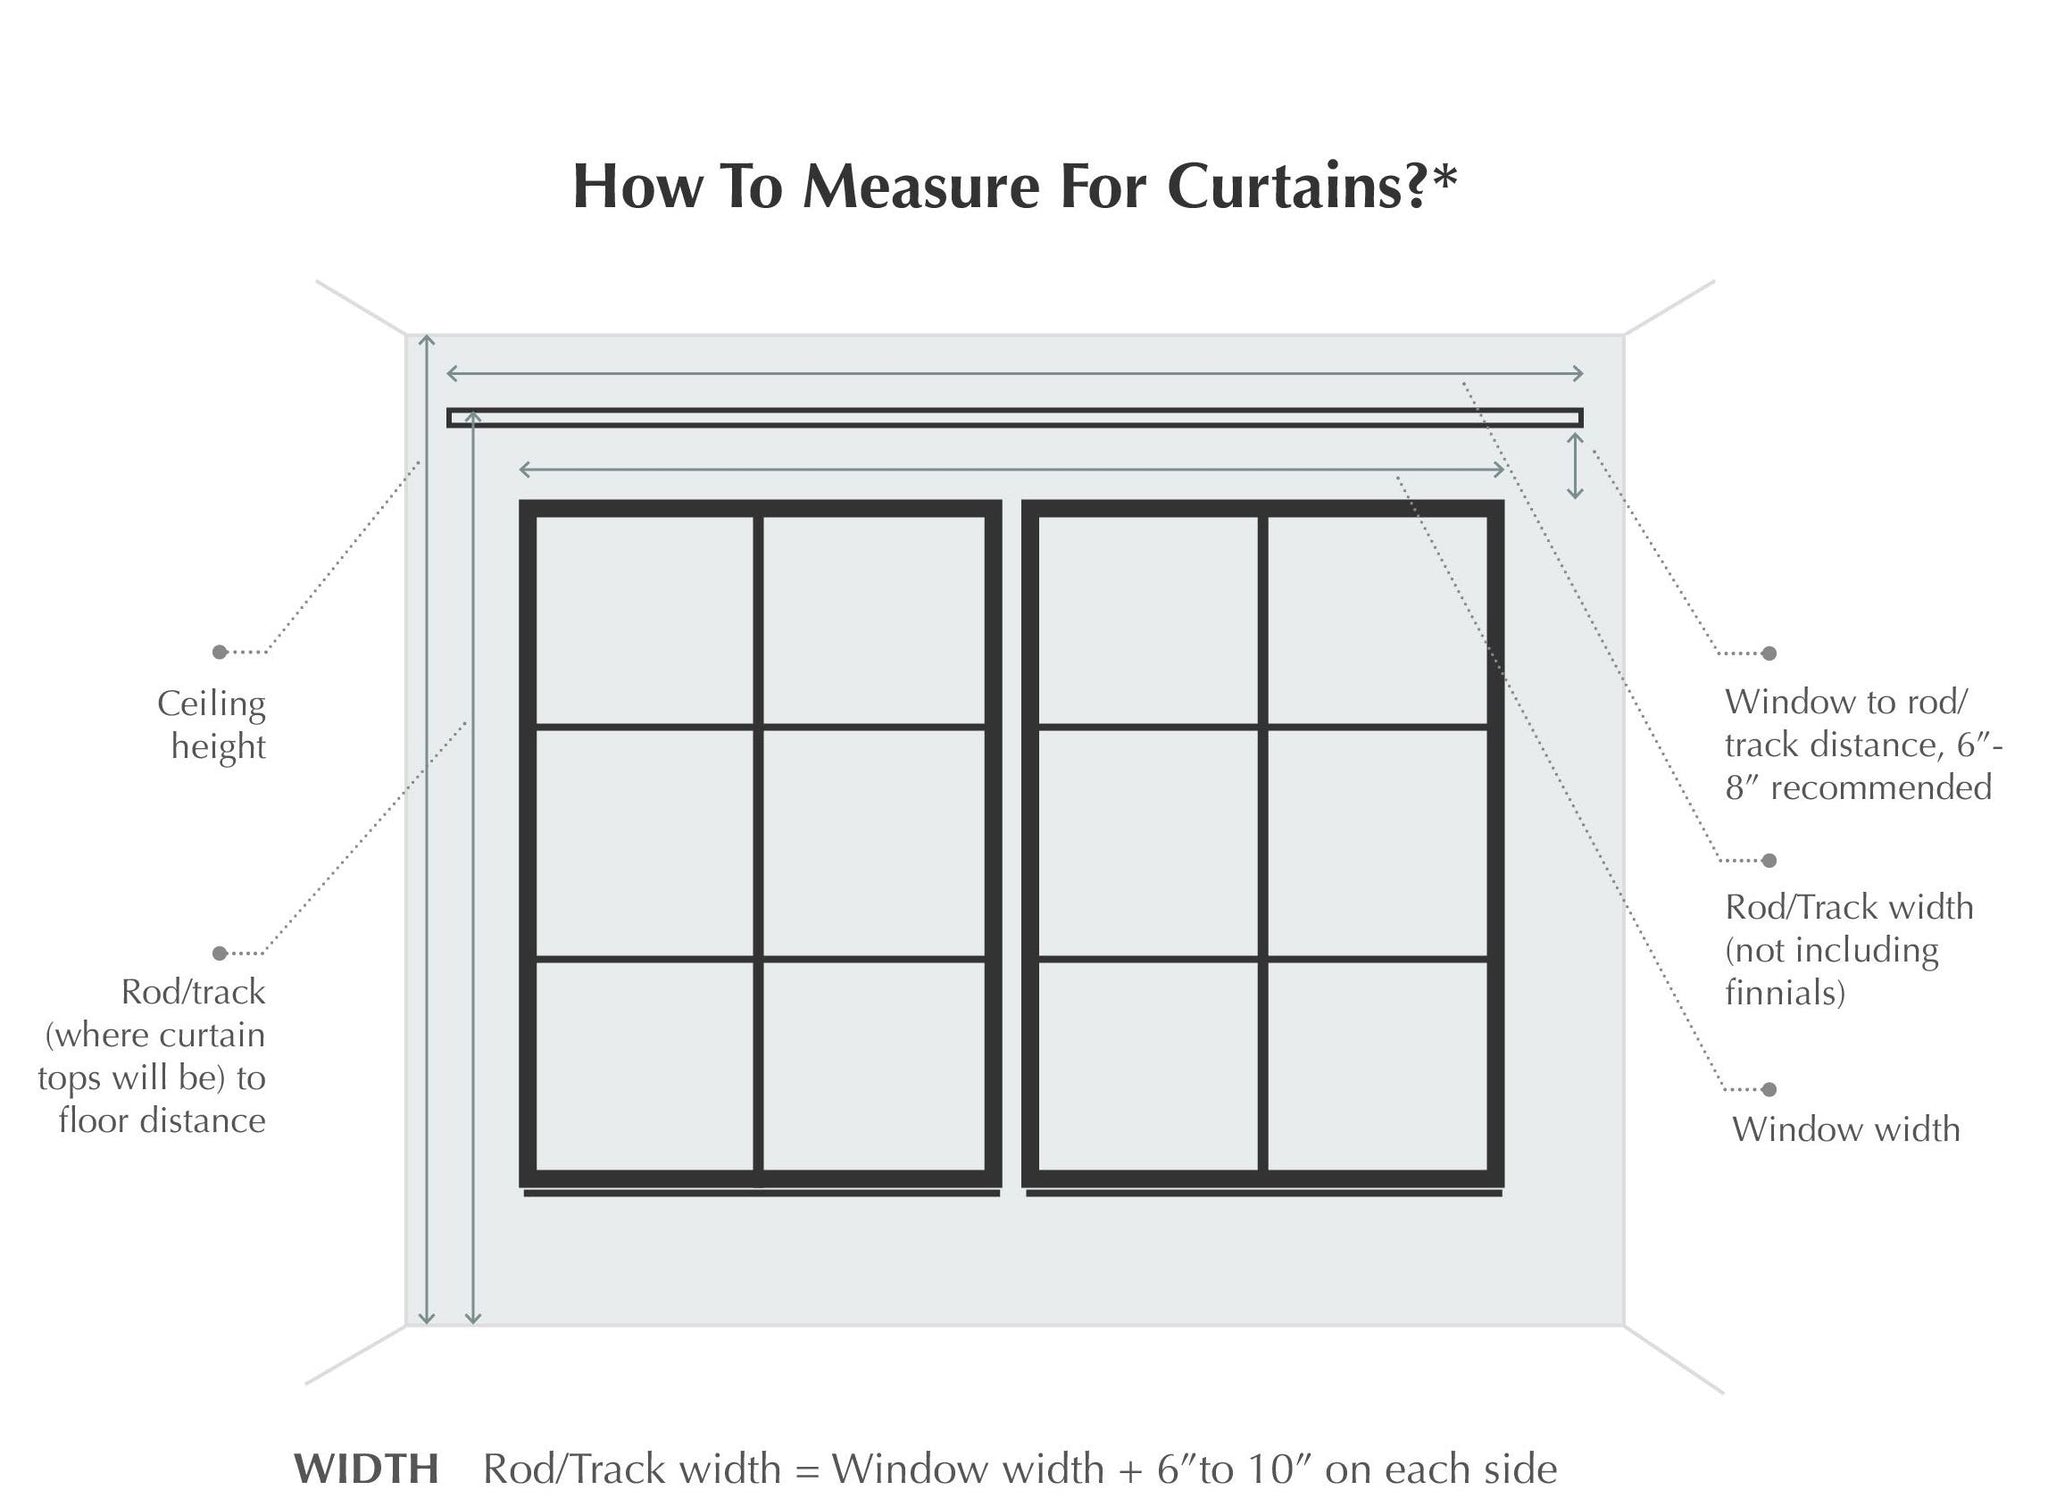 How to measure for curtains? custom made curtain size vs window sizes ...